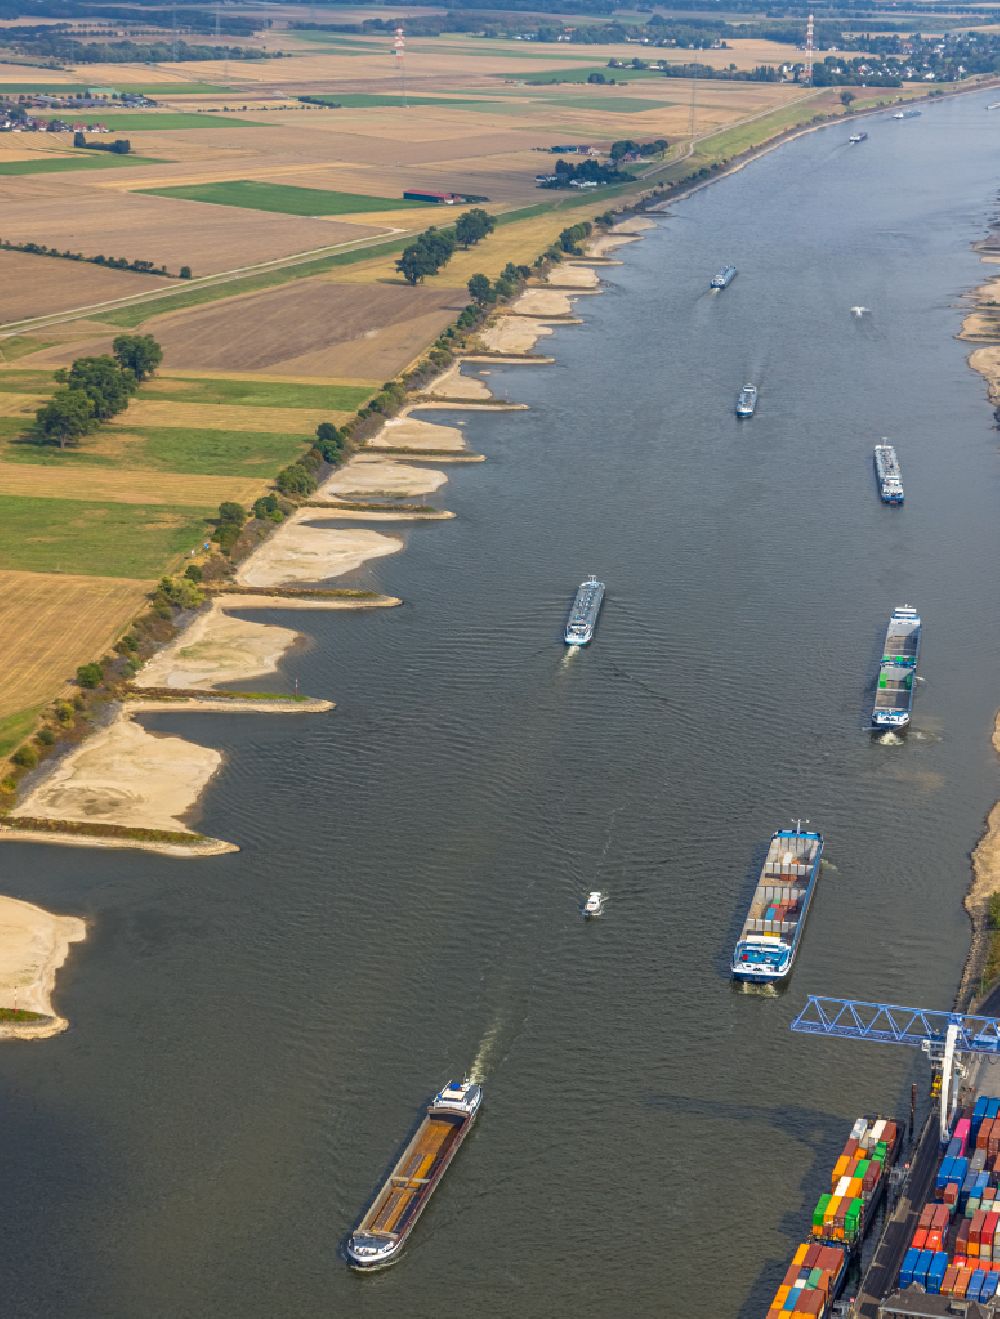 Krefeld from above - Ships and barge trains inland waterway transport in driving on the waterway of the river of the Rhine river in the district Muendelheim in Krefeld in the state North Rhine-Westphalia, Germany